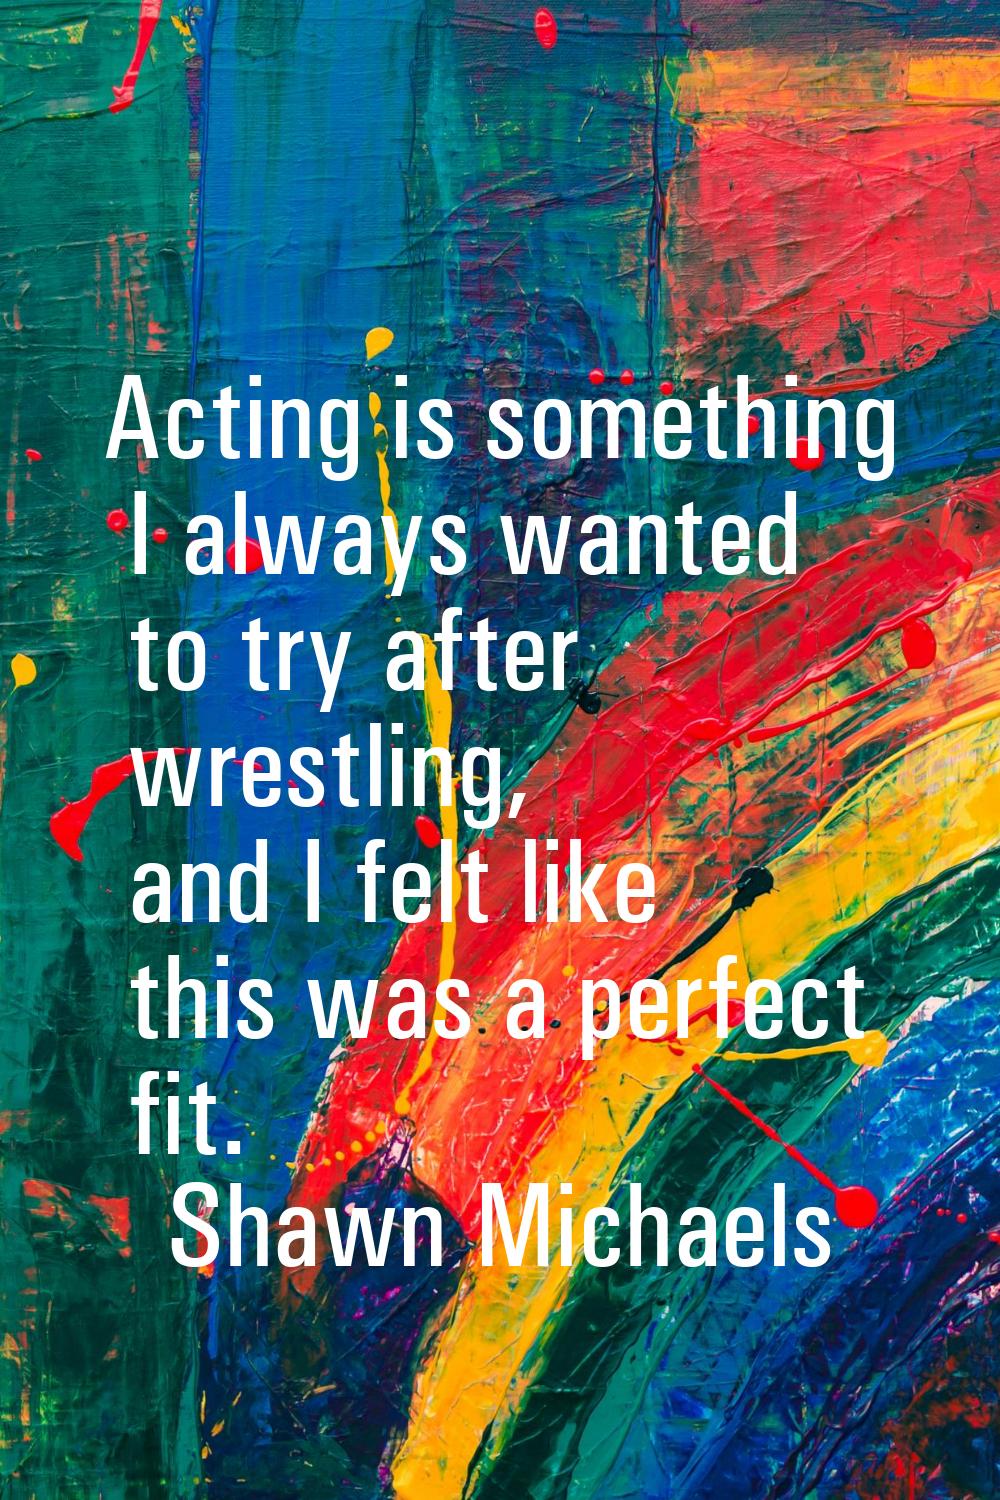 Acting is something I always wanted to try after wrestling, and I felt like this was a perfect fit.